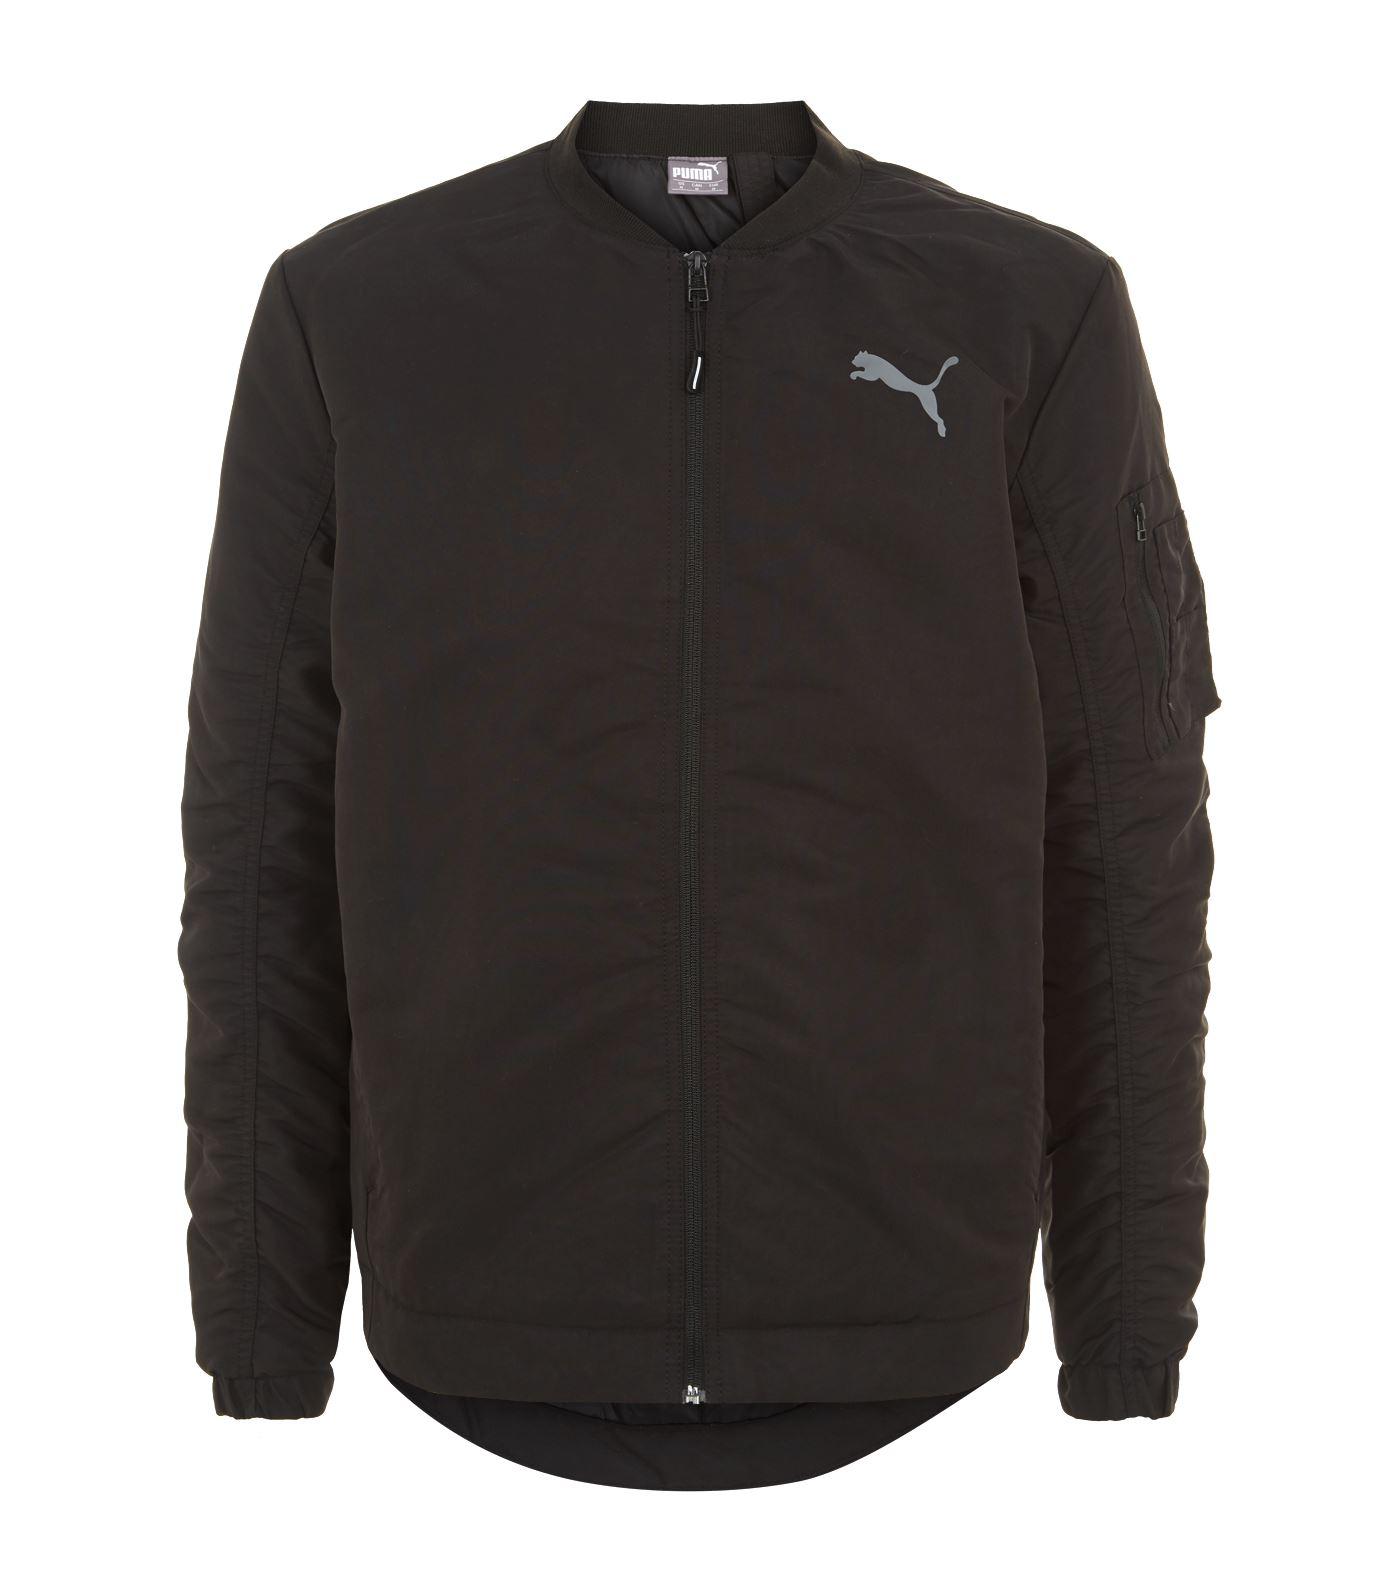 PUMA Style Bomber Jacket in Black for Men - Lyst